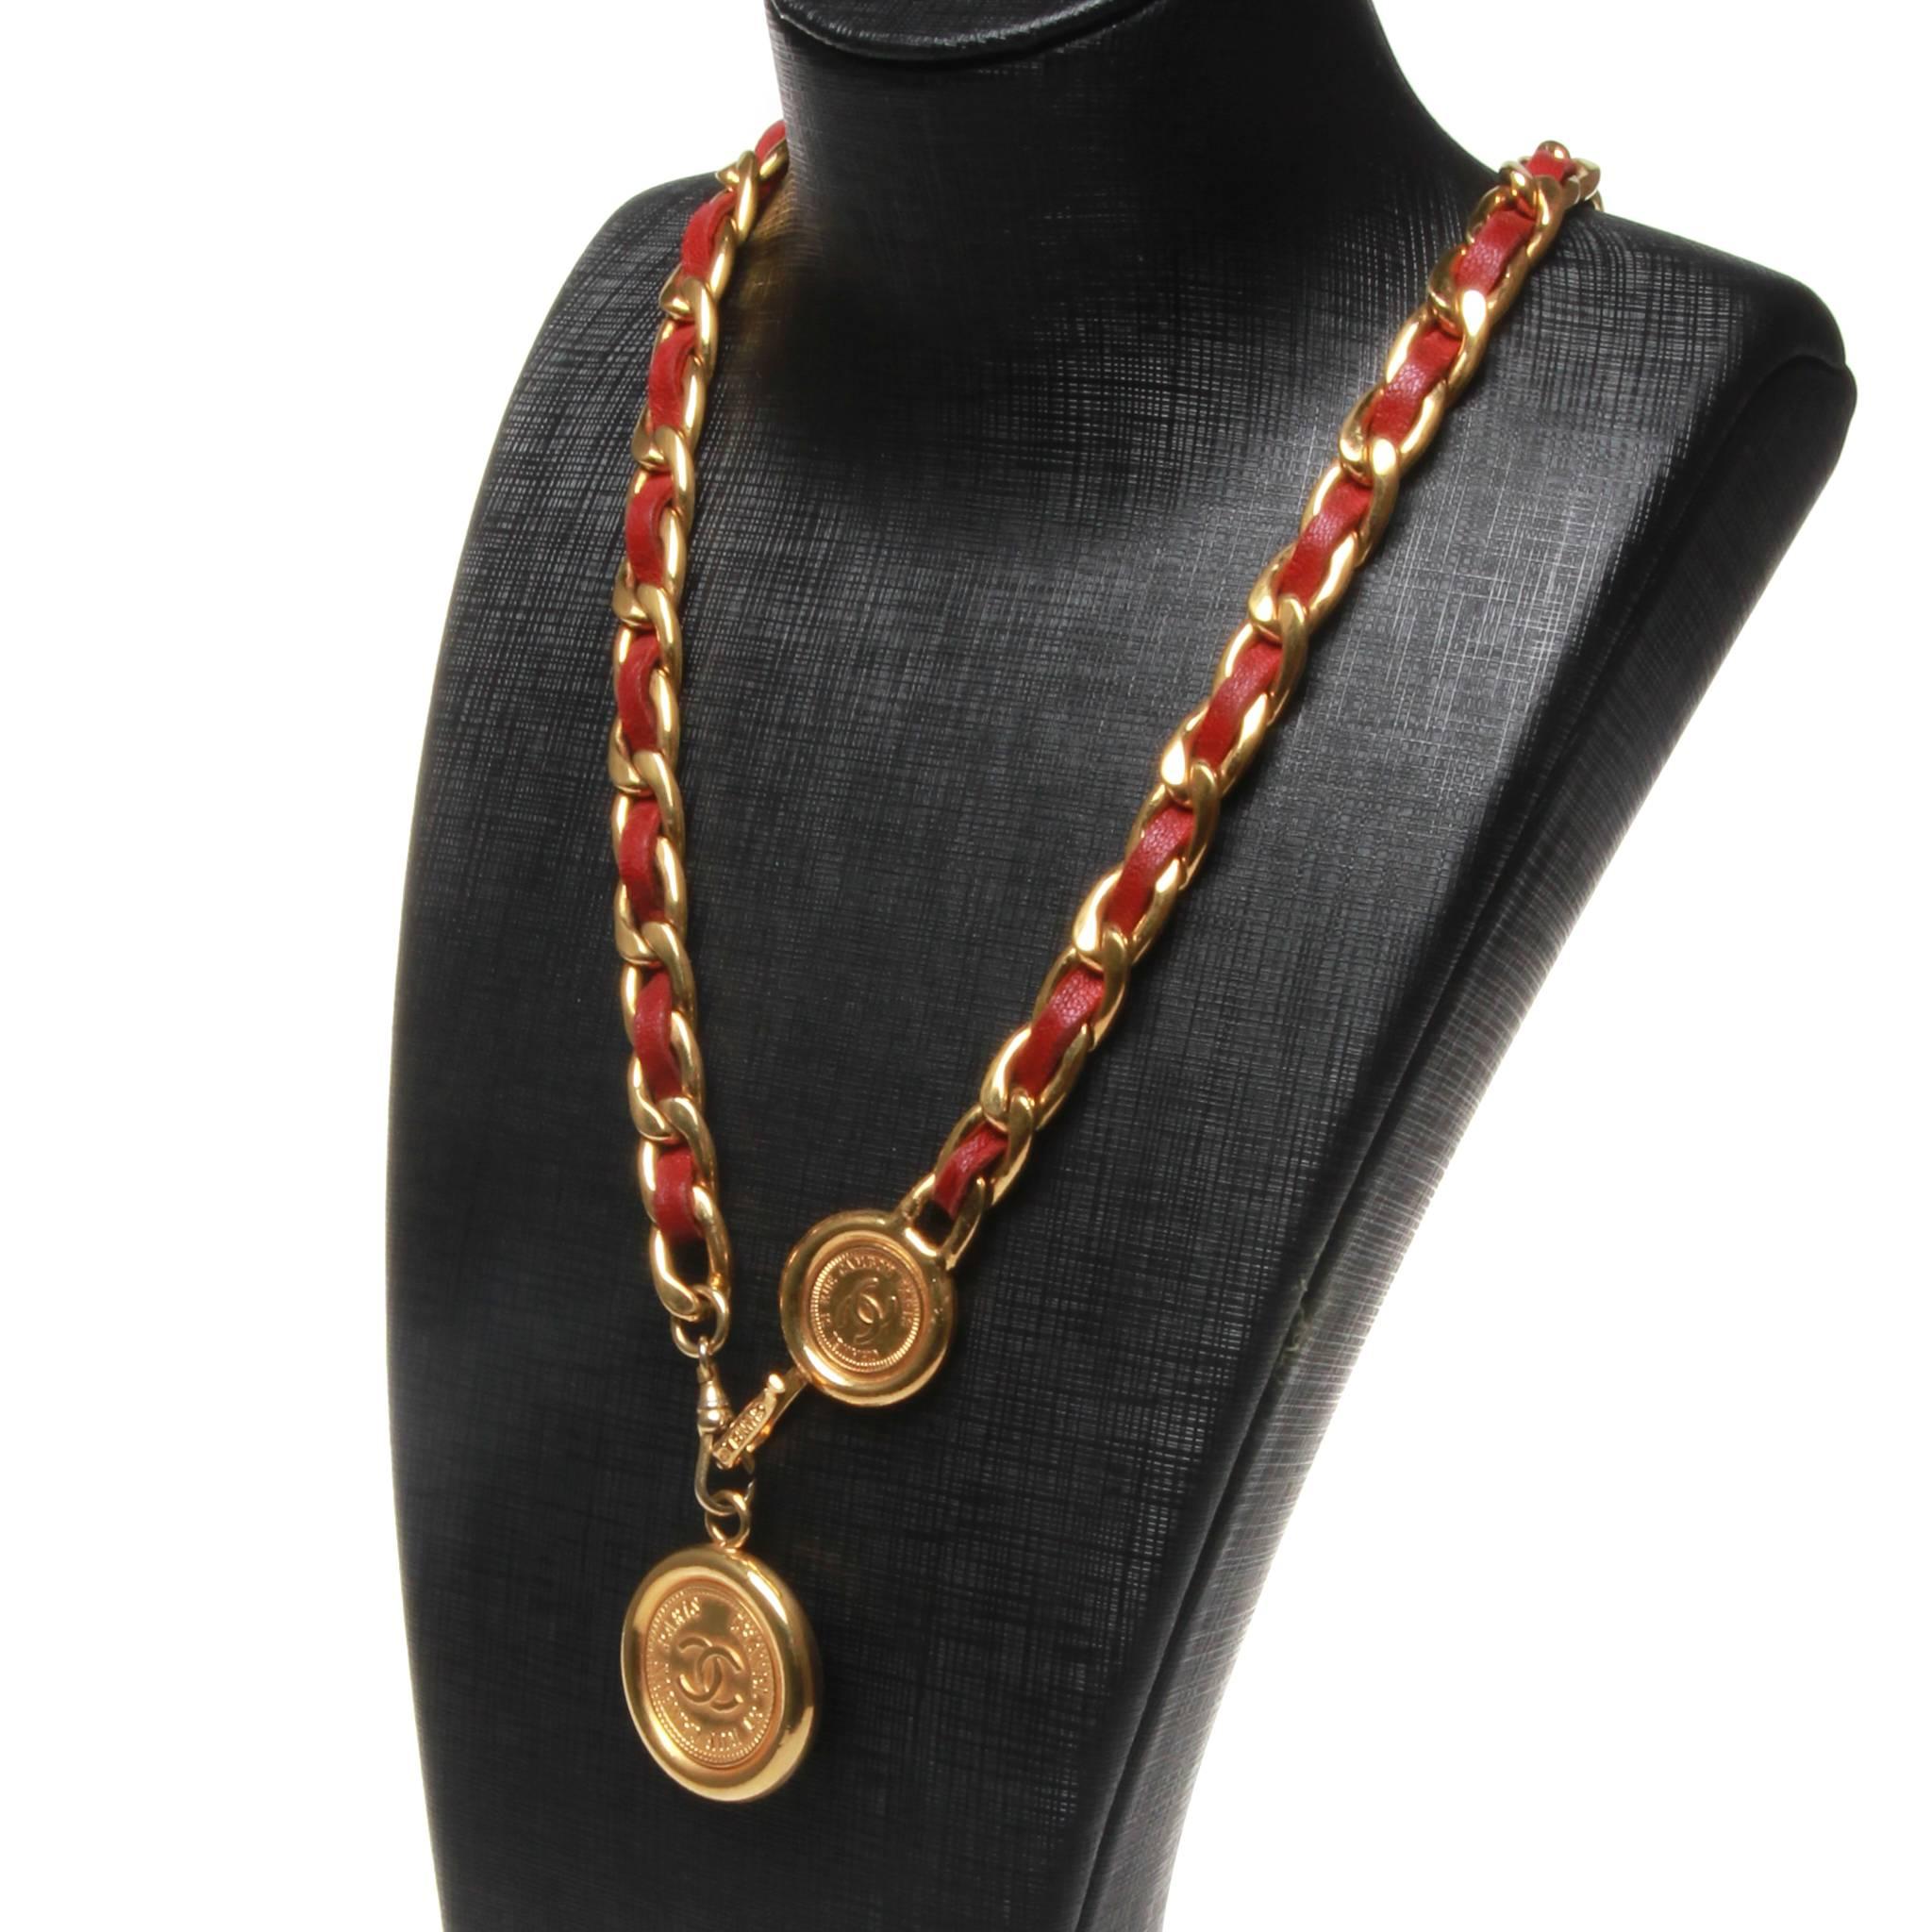 Vintage 80s Chanel necklace with a coin pendant. Opera length chain is interwoven with red leather. Feature coin hook closure at one end as well as a small lobster claw at the other. 

Pendant - 1.25